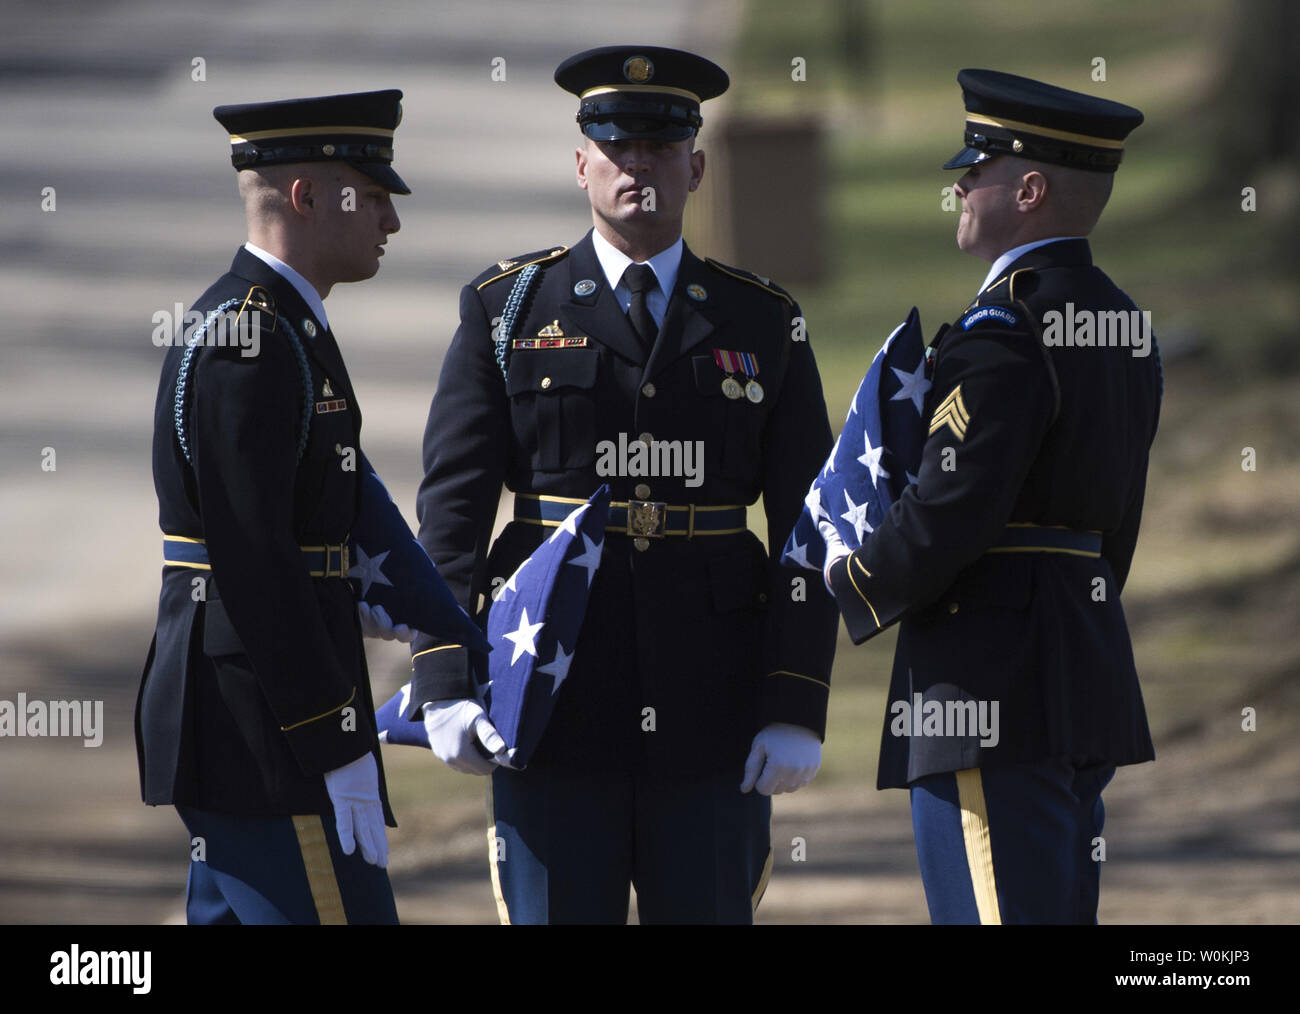 Members of an Army Honor Guard with the Army's 3rd Infantry Regiment (The Old Guard) hold flags during a funeral service for U.S. Army Sgt. First Class Matthew Q. McClintock, at Arlington National Cemetery in Arlington, Virginia on March 7, 2015. SFC McClintock, a U.S. Army Special Forces soldier, was killed in action on Tuesday, January 5, 2016, in Afghanistan. Photo by Kevin Dietsch/UPI Stock Photo